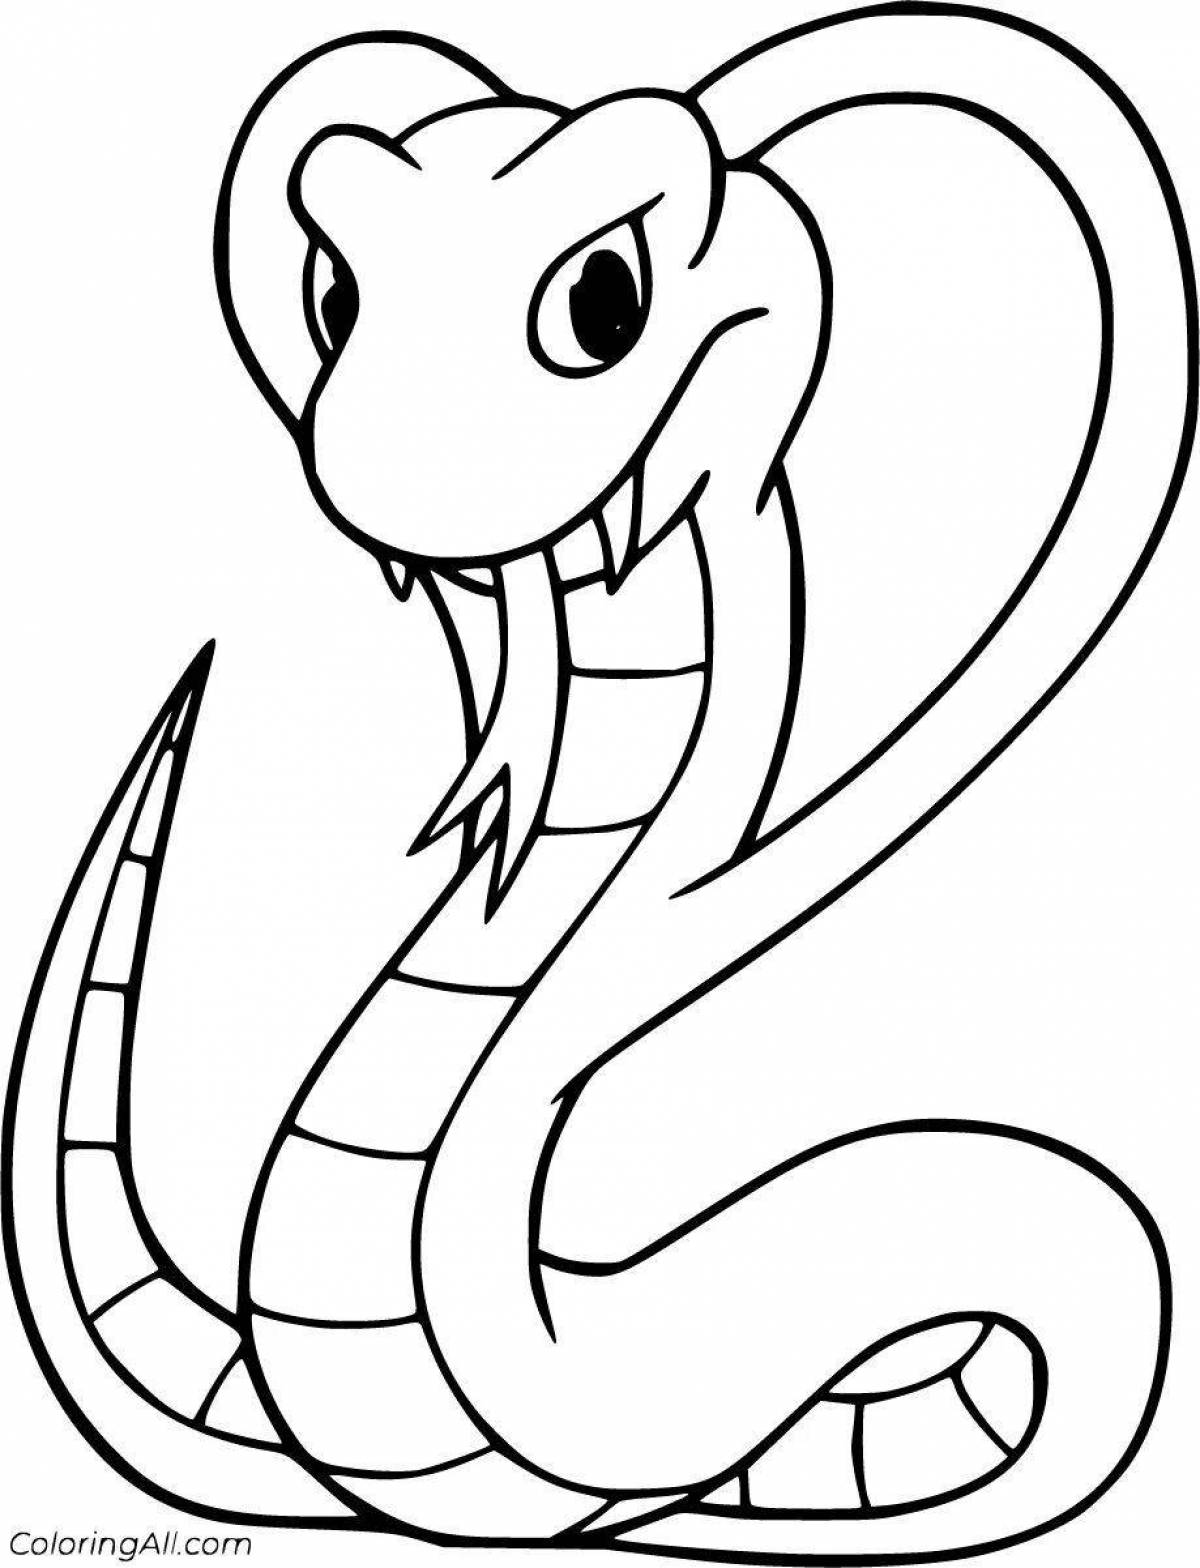 Detailed cobra coloring page for kids